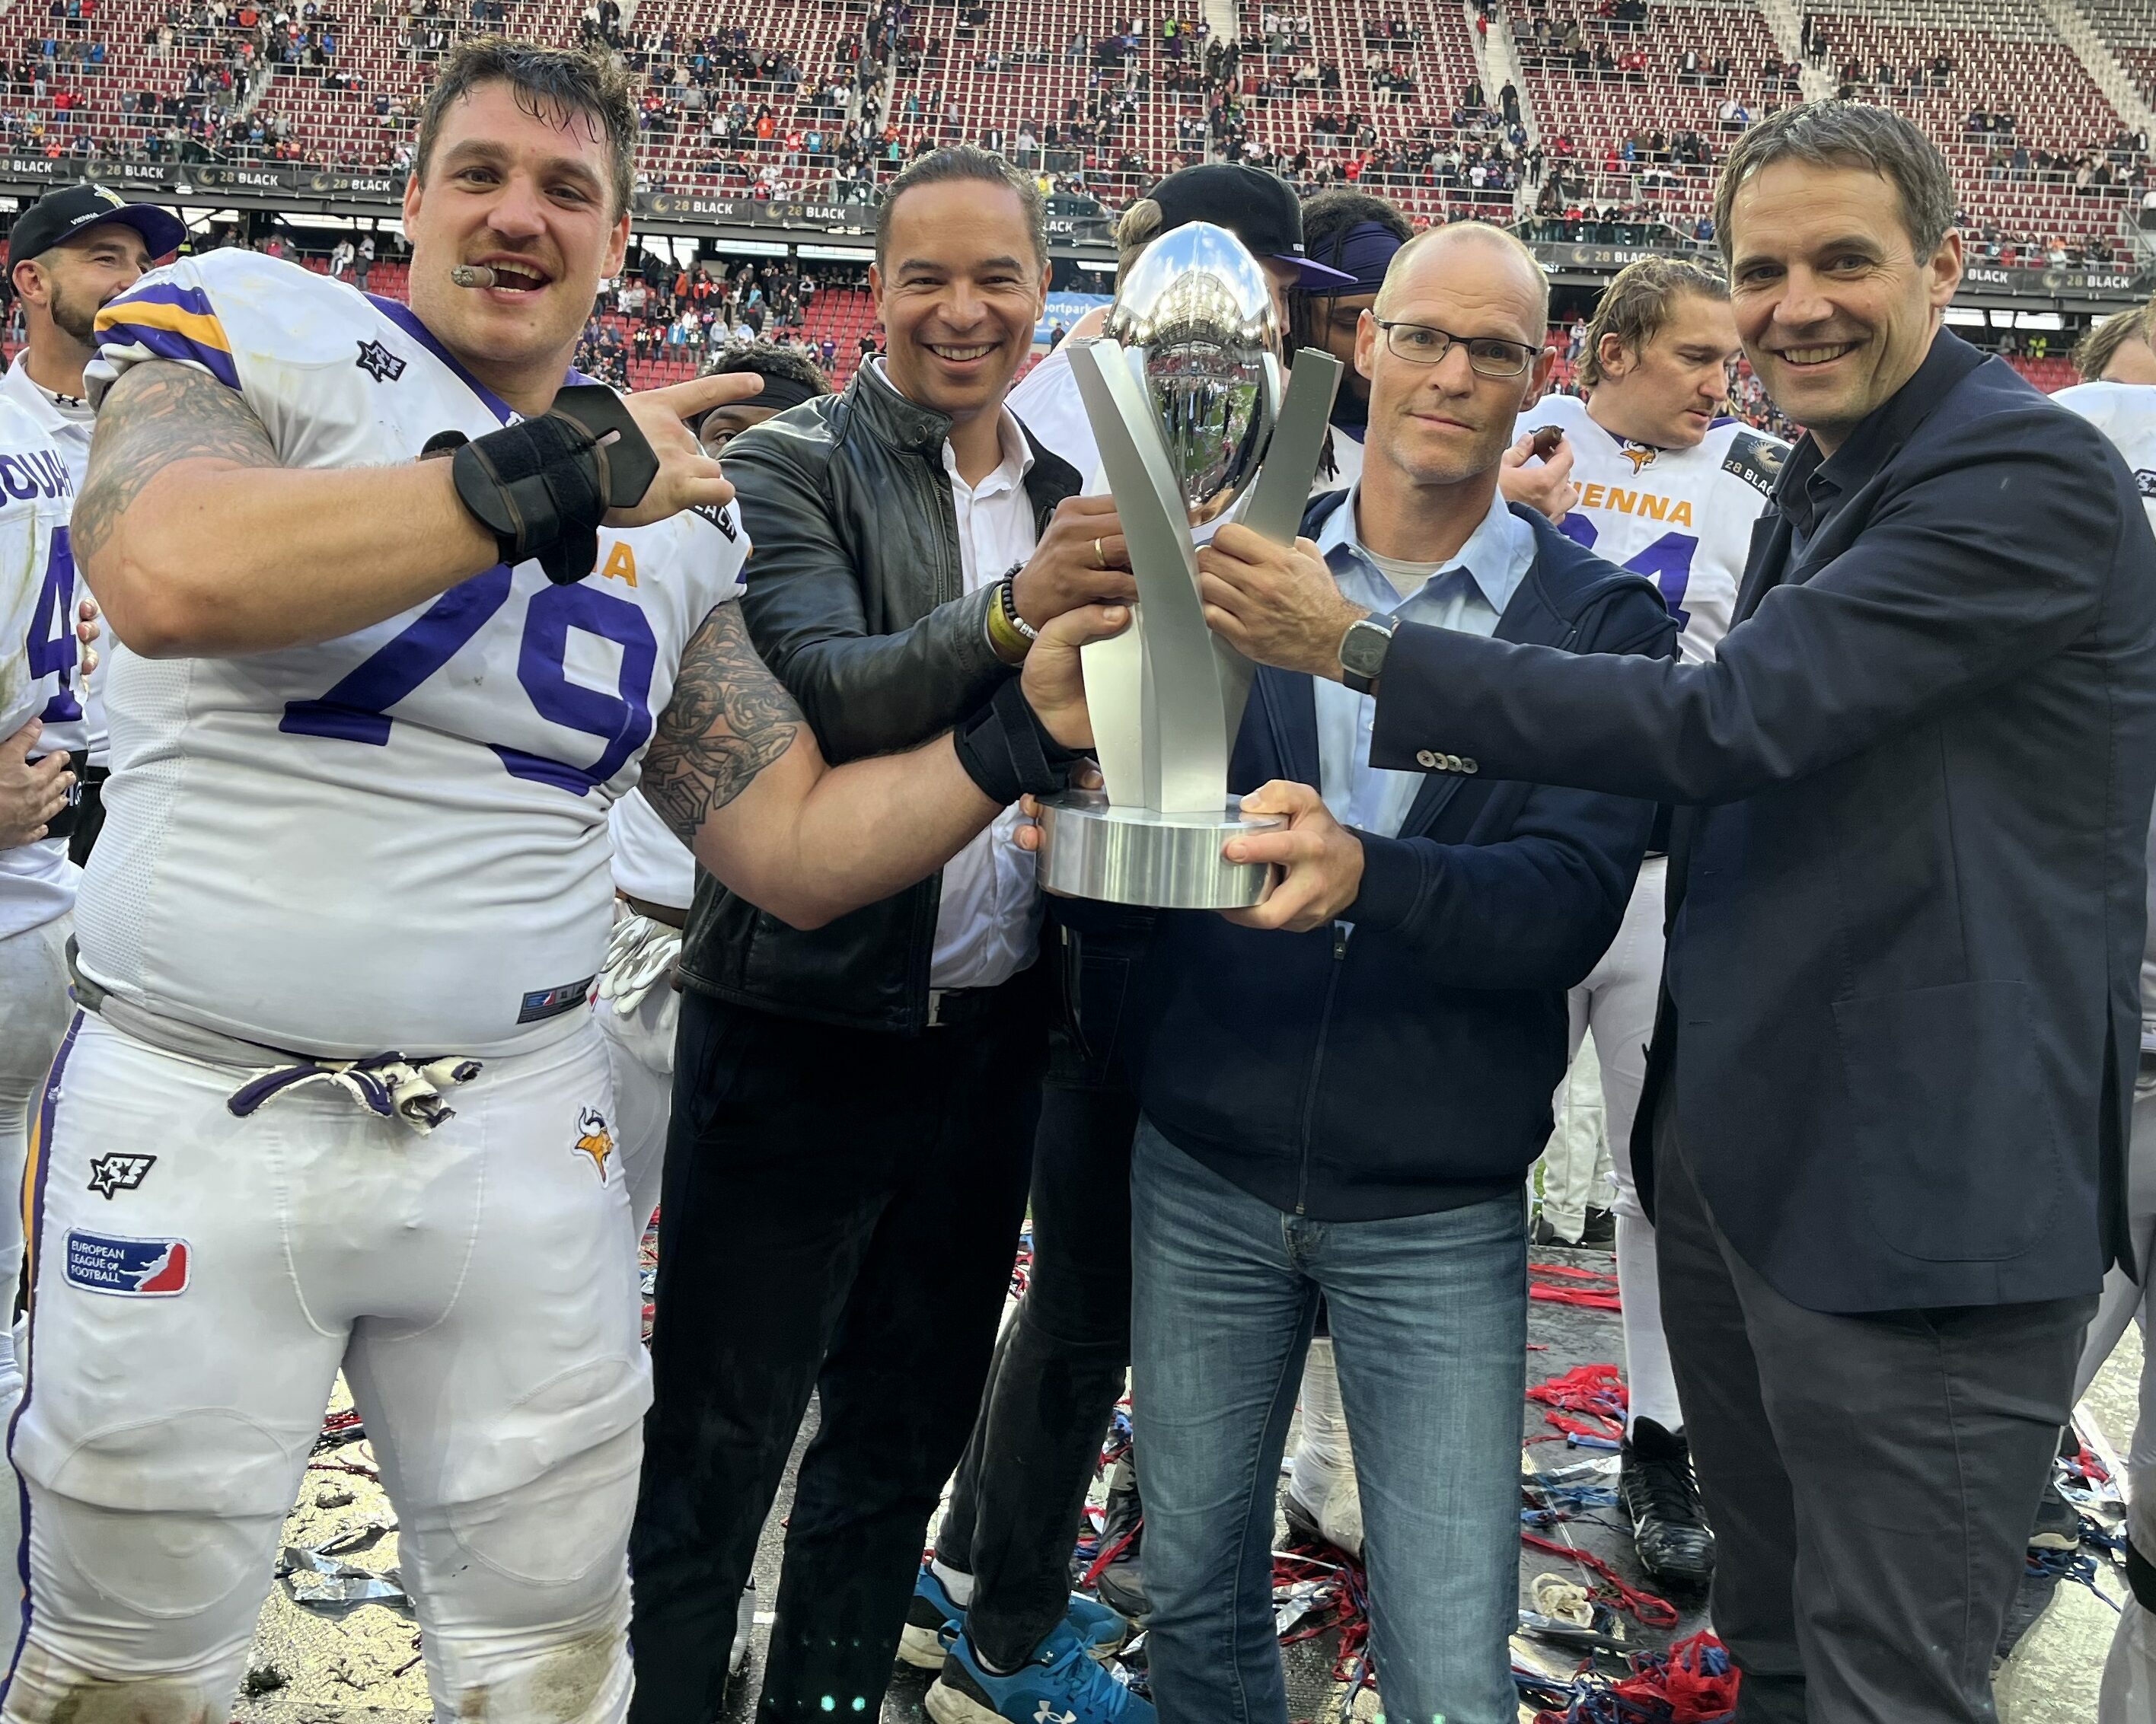 The VIENNA VIKINGS are the champions of the EUROPEAN LEAGUE of FOOTBALL 2022Impressive success of the new franchise from Vienna!